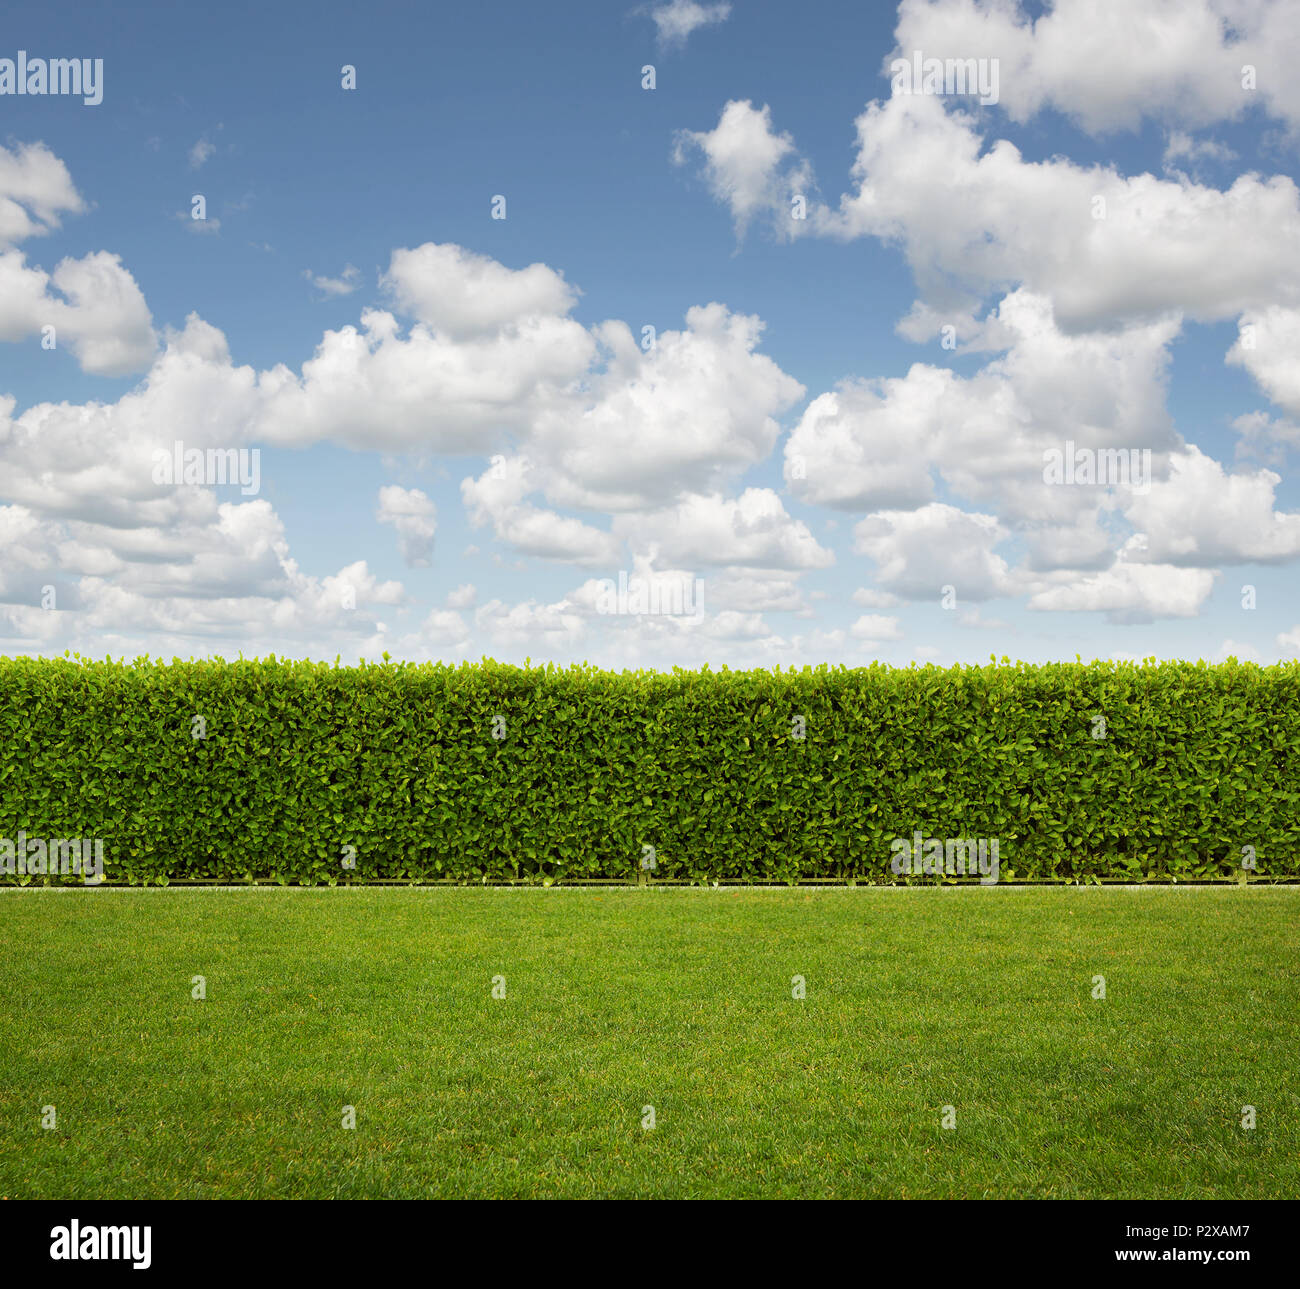 Back Yard, close up of hedge fence on the grass with copy space Stock Photo